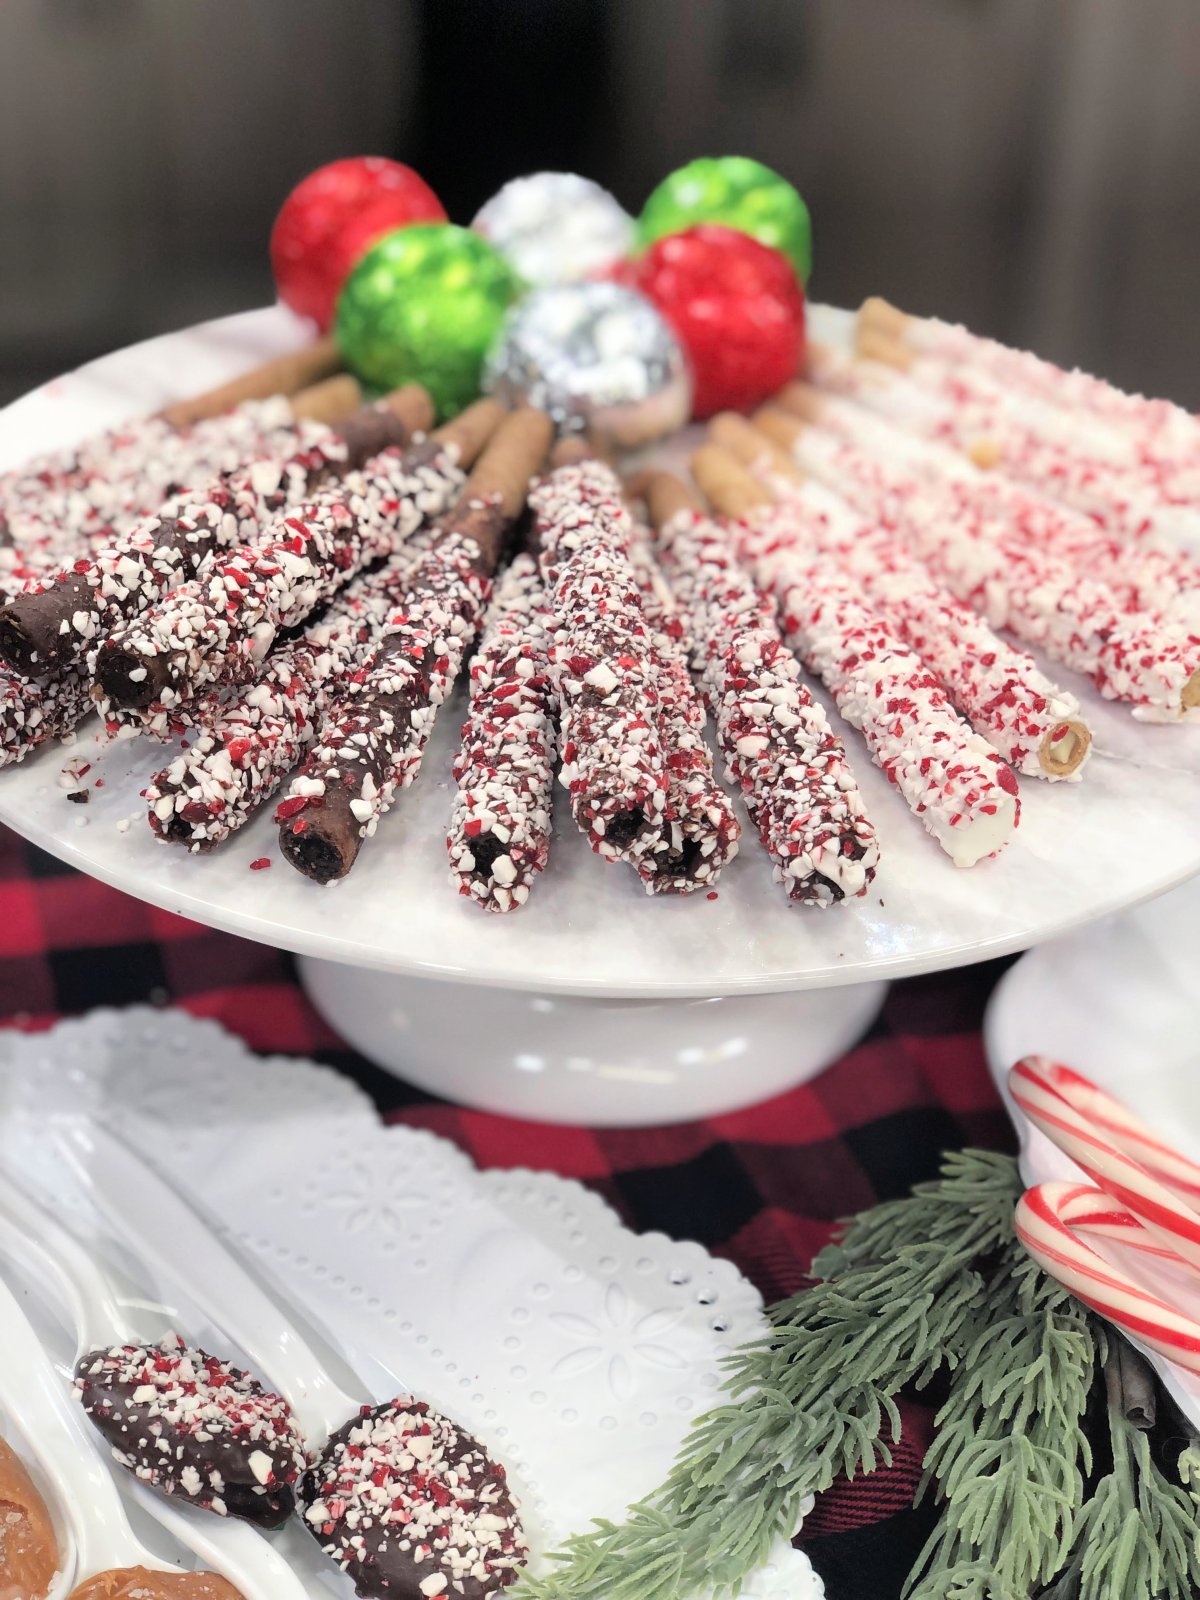 Image contains chocolate dipped pirouette cookies rolled in peppermint, and hot cocoa bombs on a white plate.